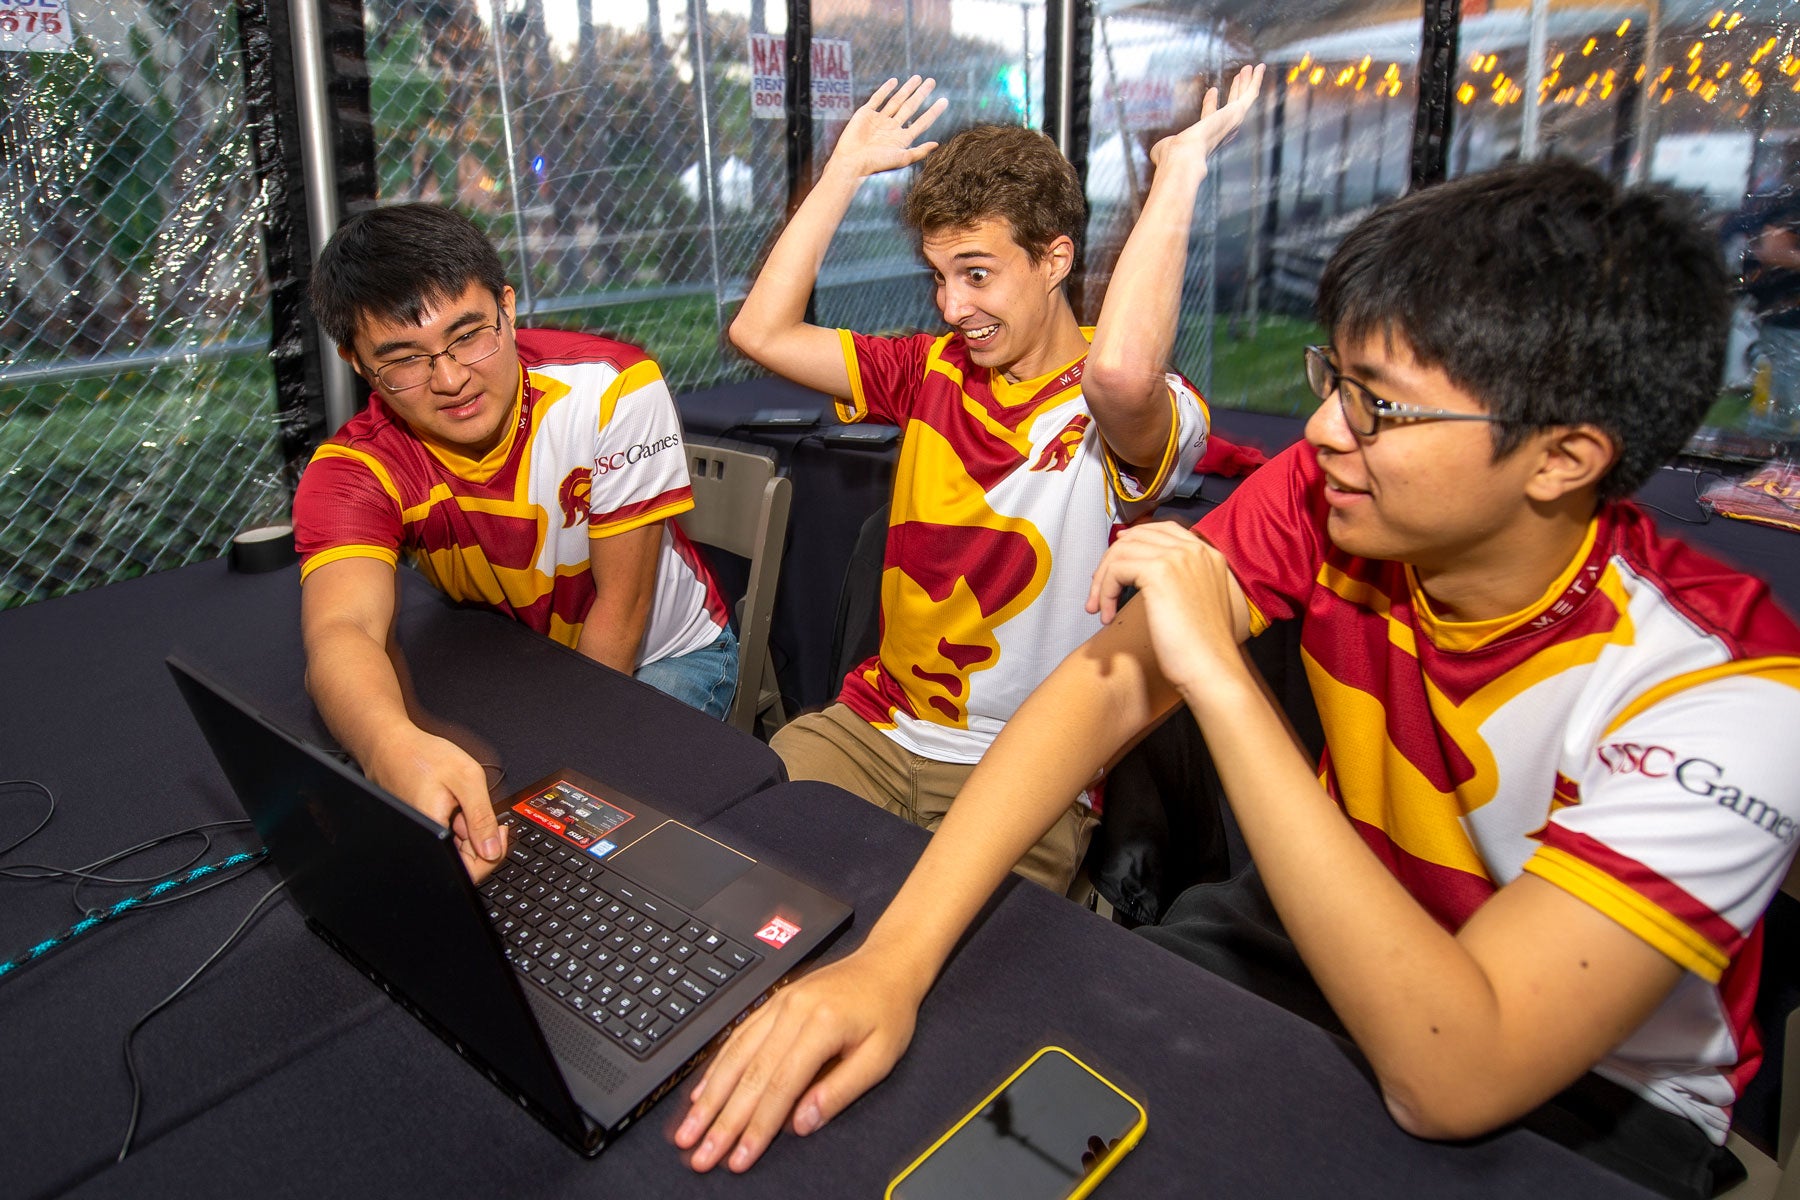 USC esports stars take on Bruins in online gaming battle